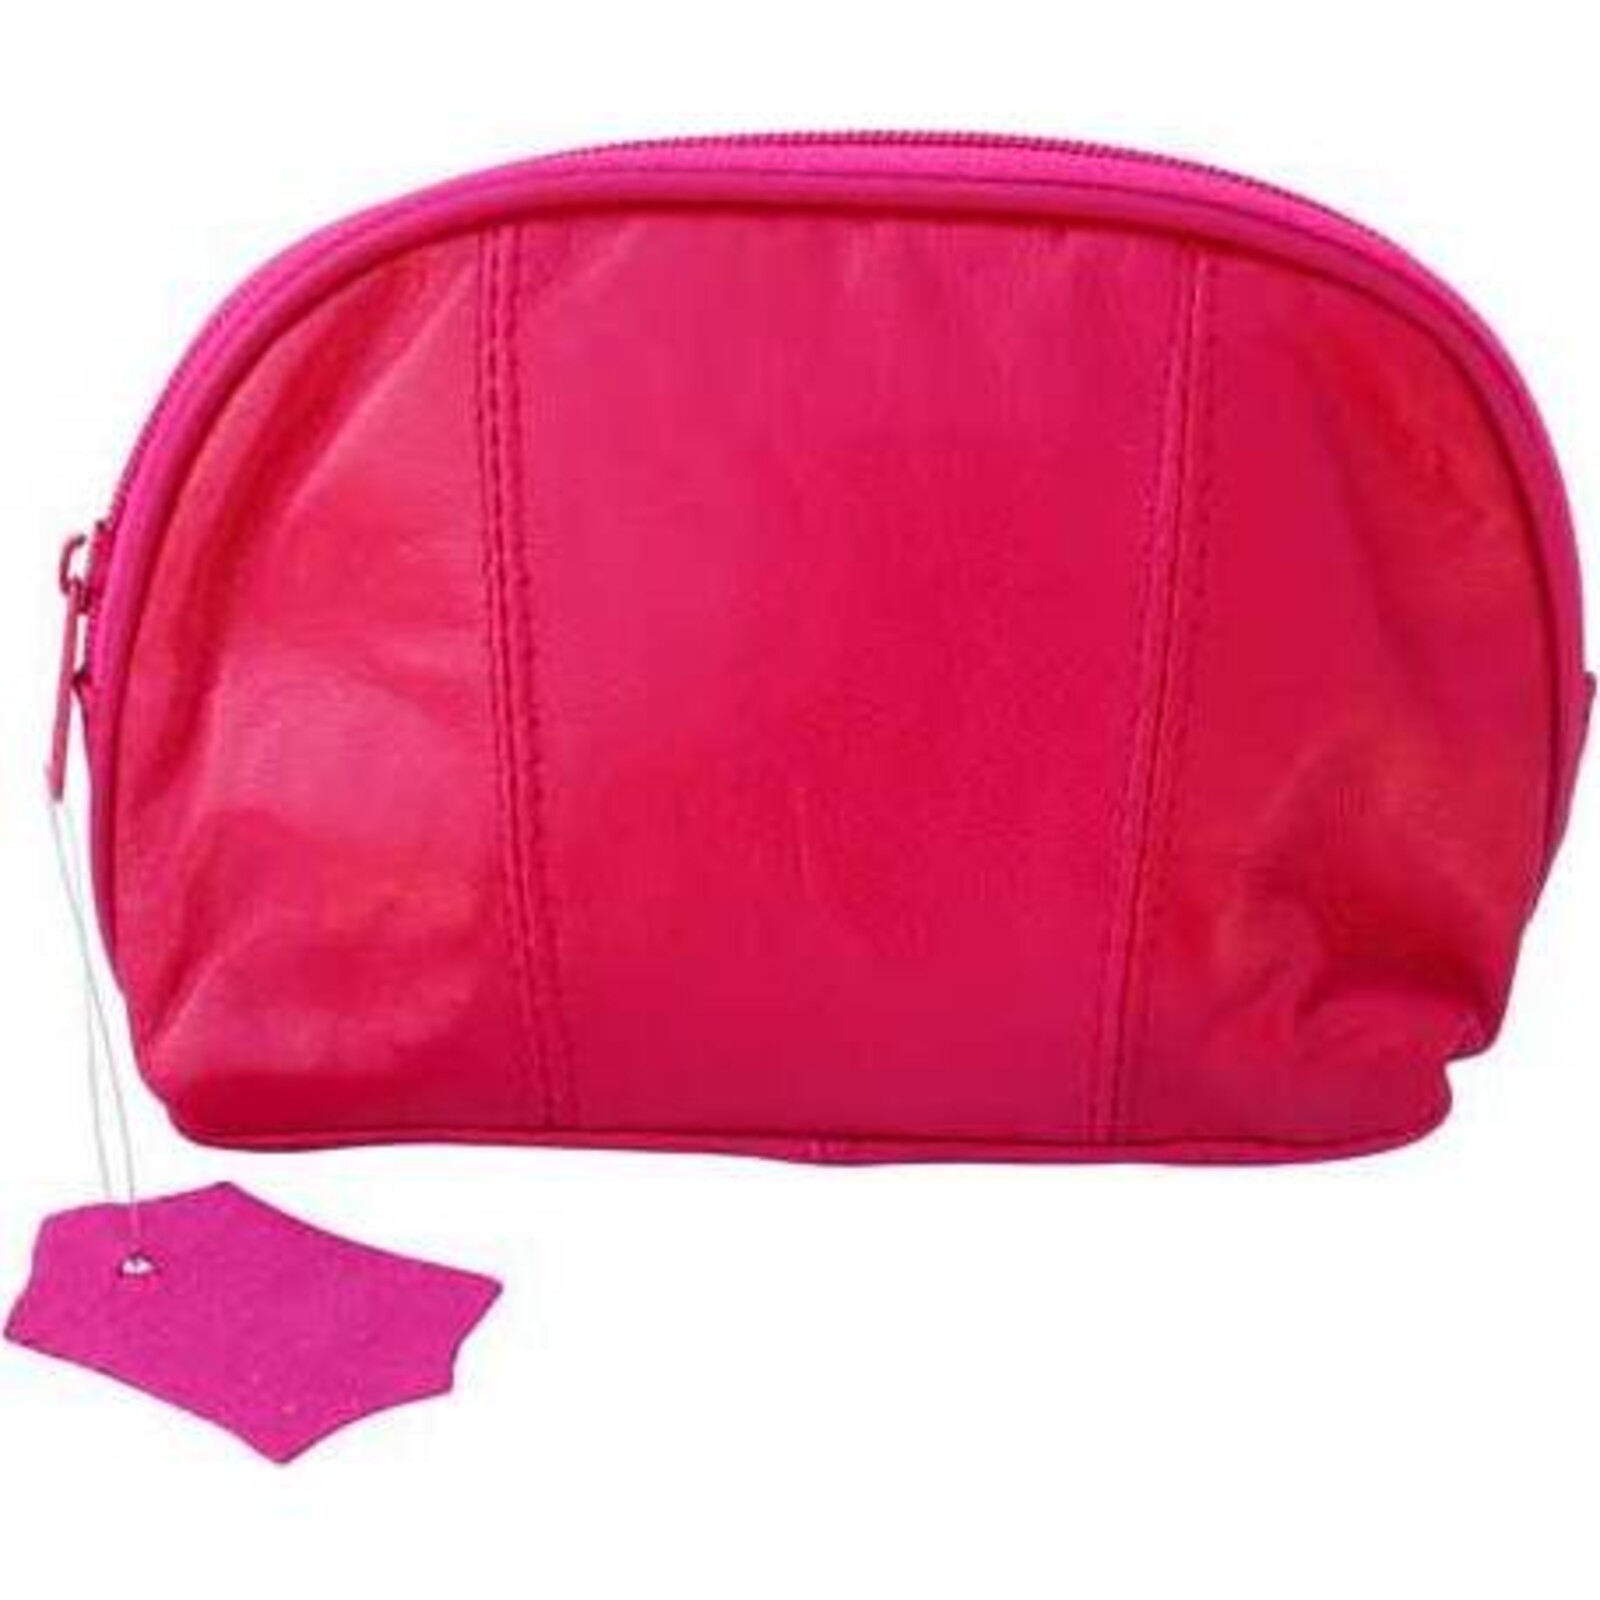 Leather Pouch Purse - Pink